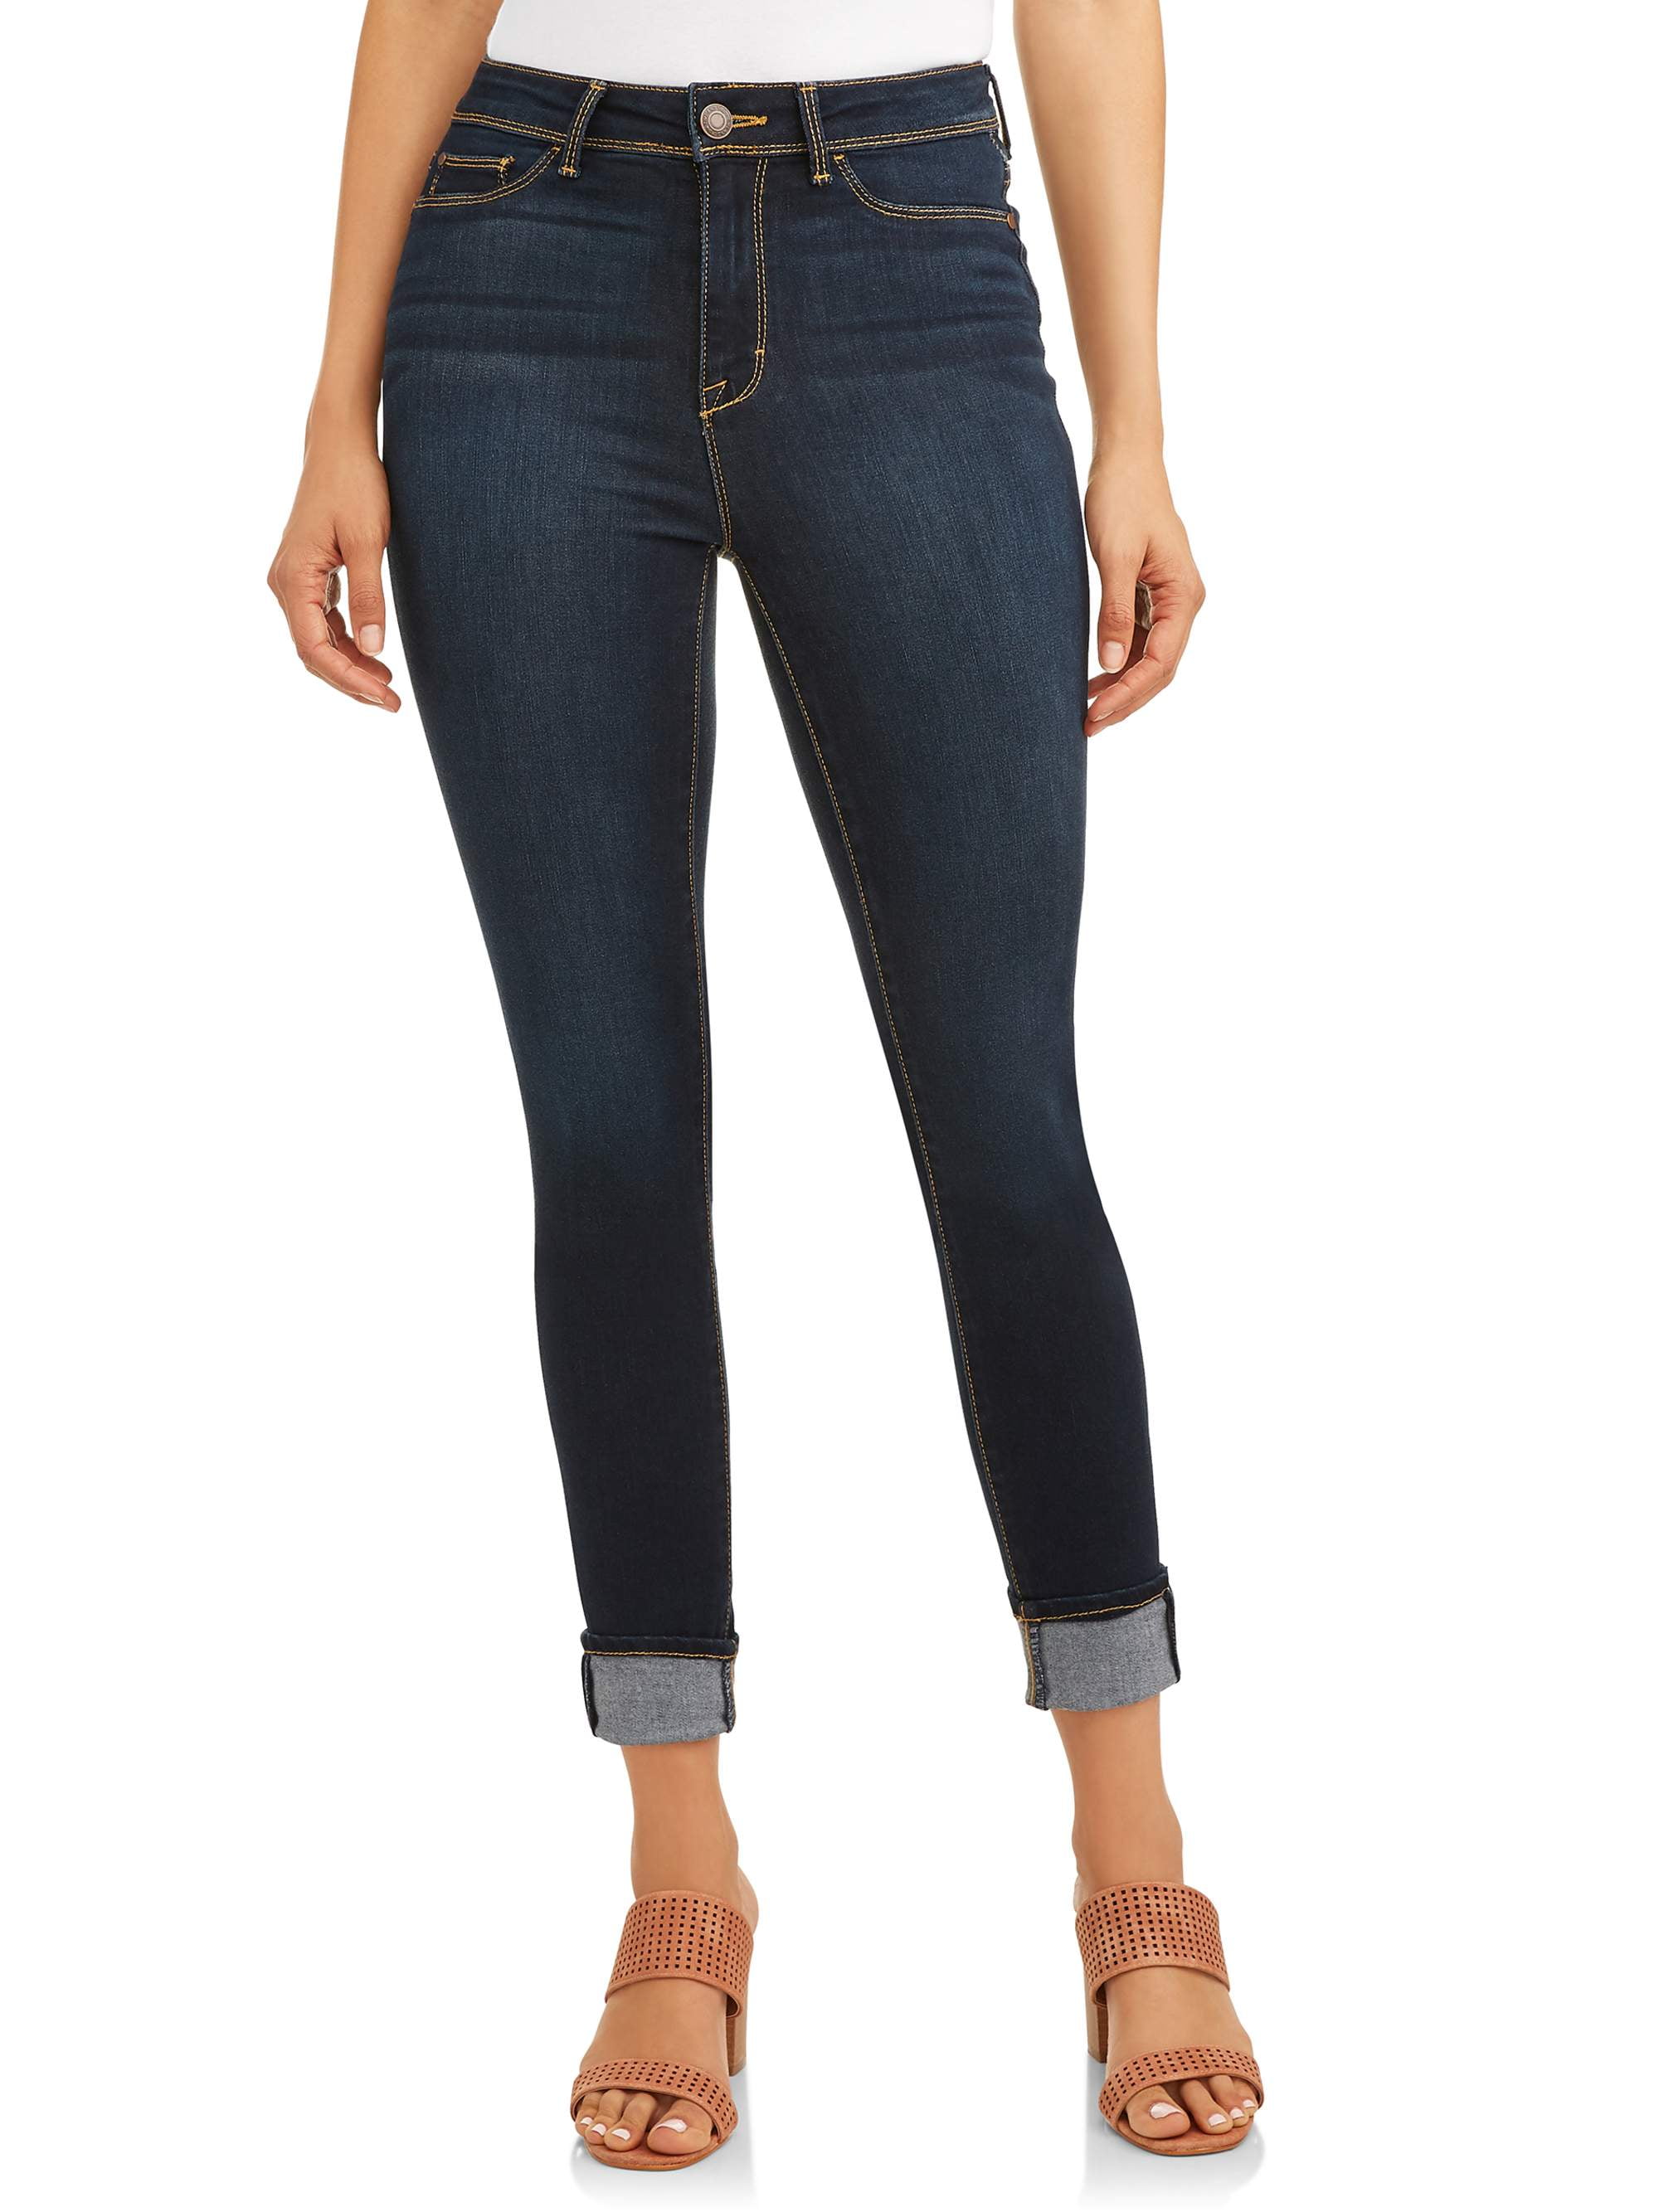 time and tru women's high rise sculpted ankle jegging